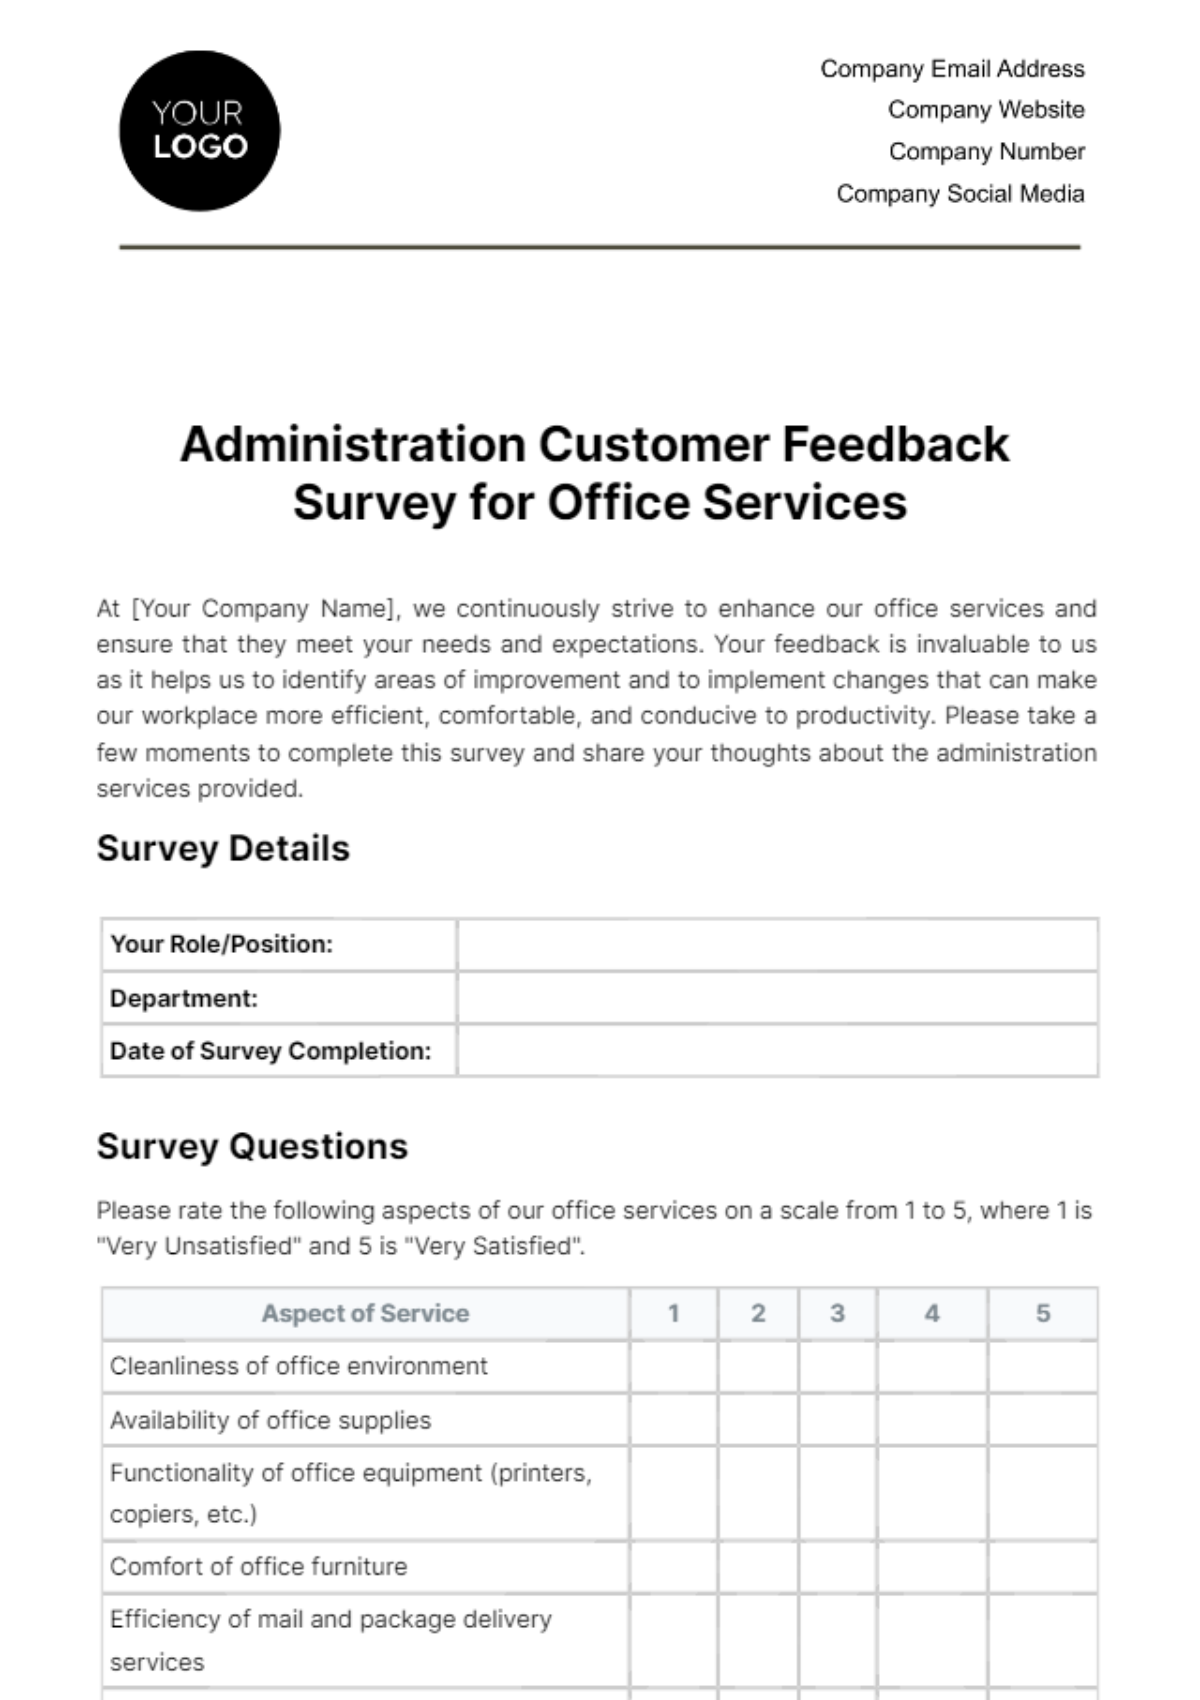 Administration Customer Feedback Survey for Office Services Template